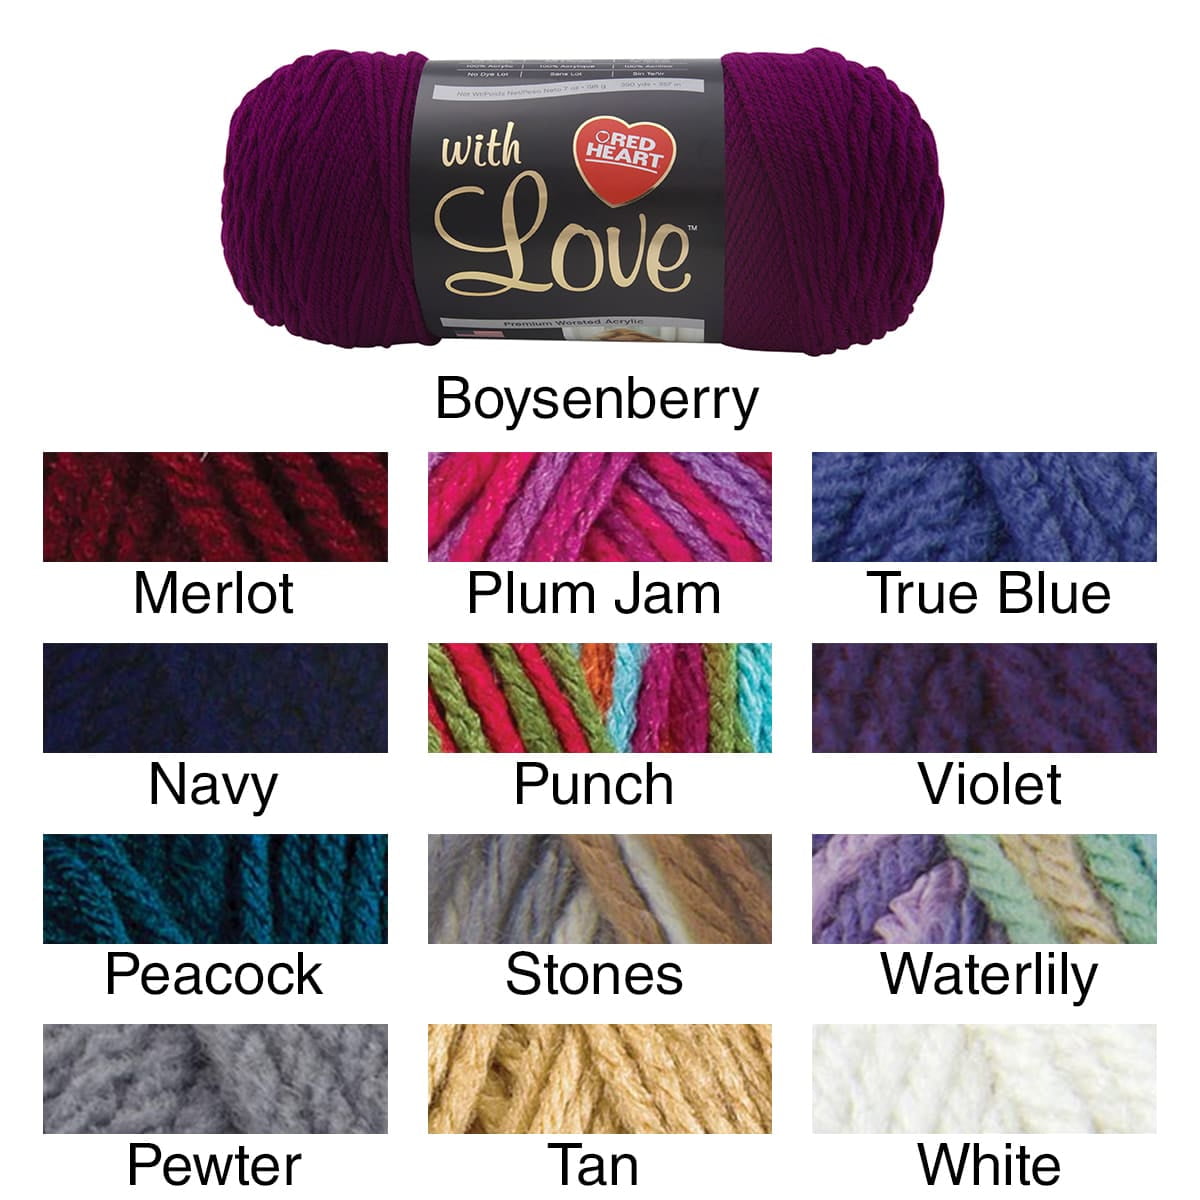 Red Heart Multipack of 6 Daffodil With Love Yarn 